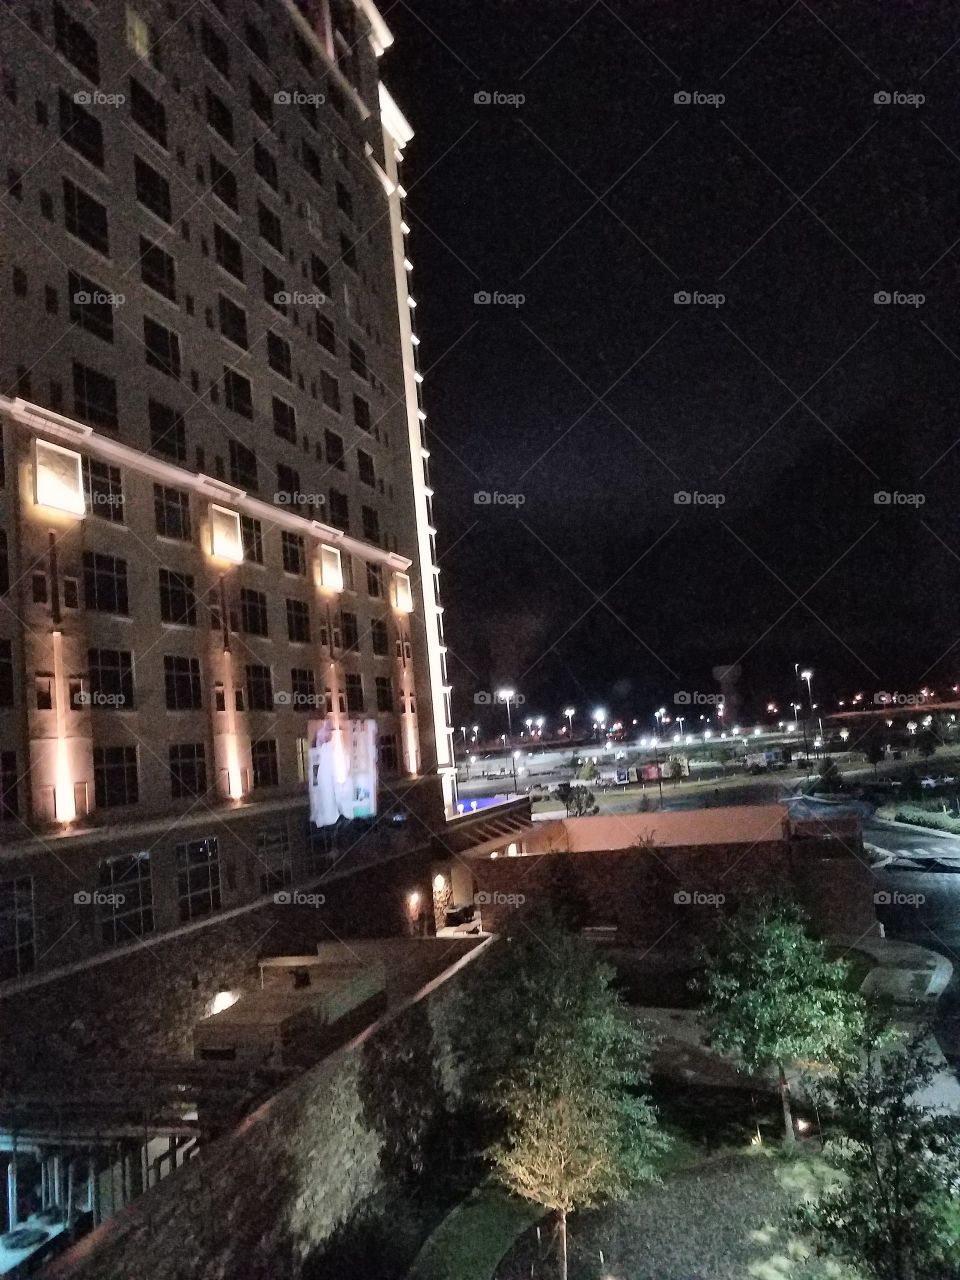 Looking out the window at Winstar Casino